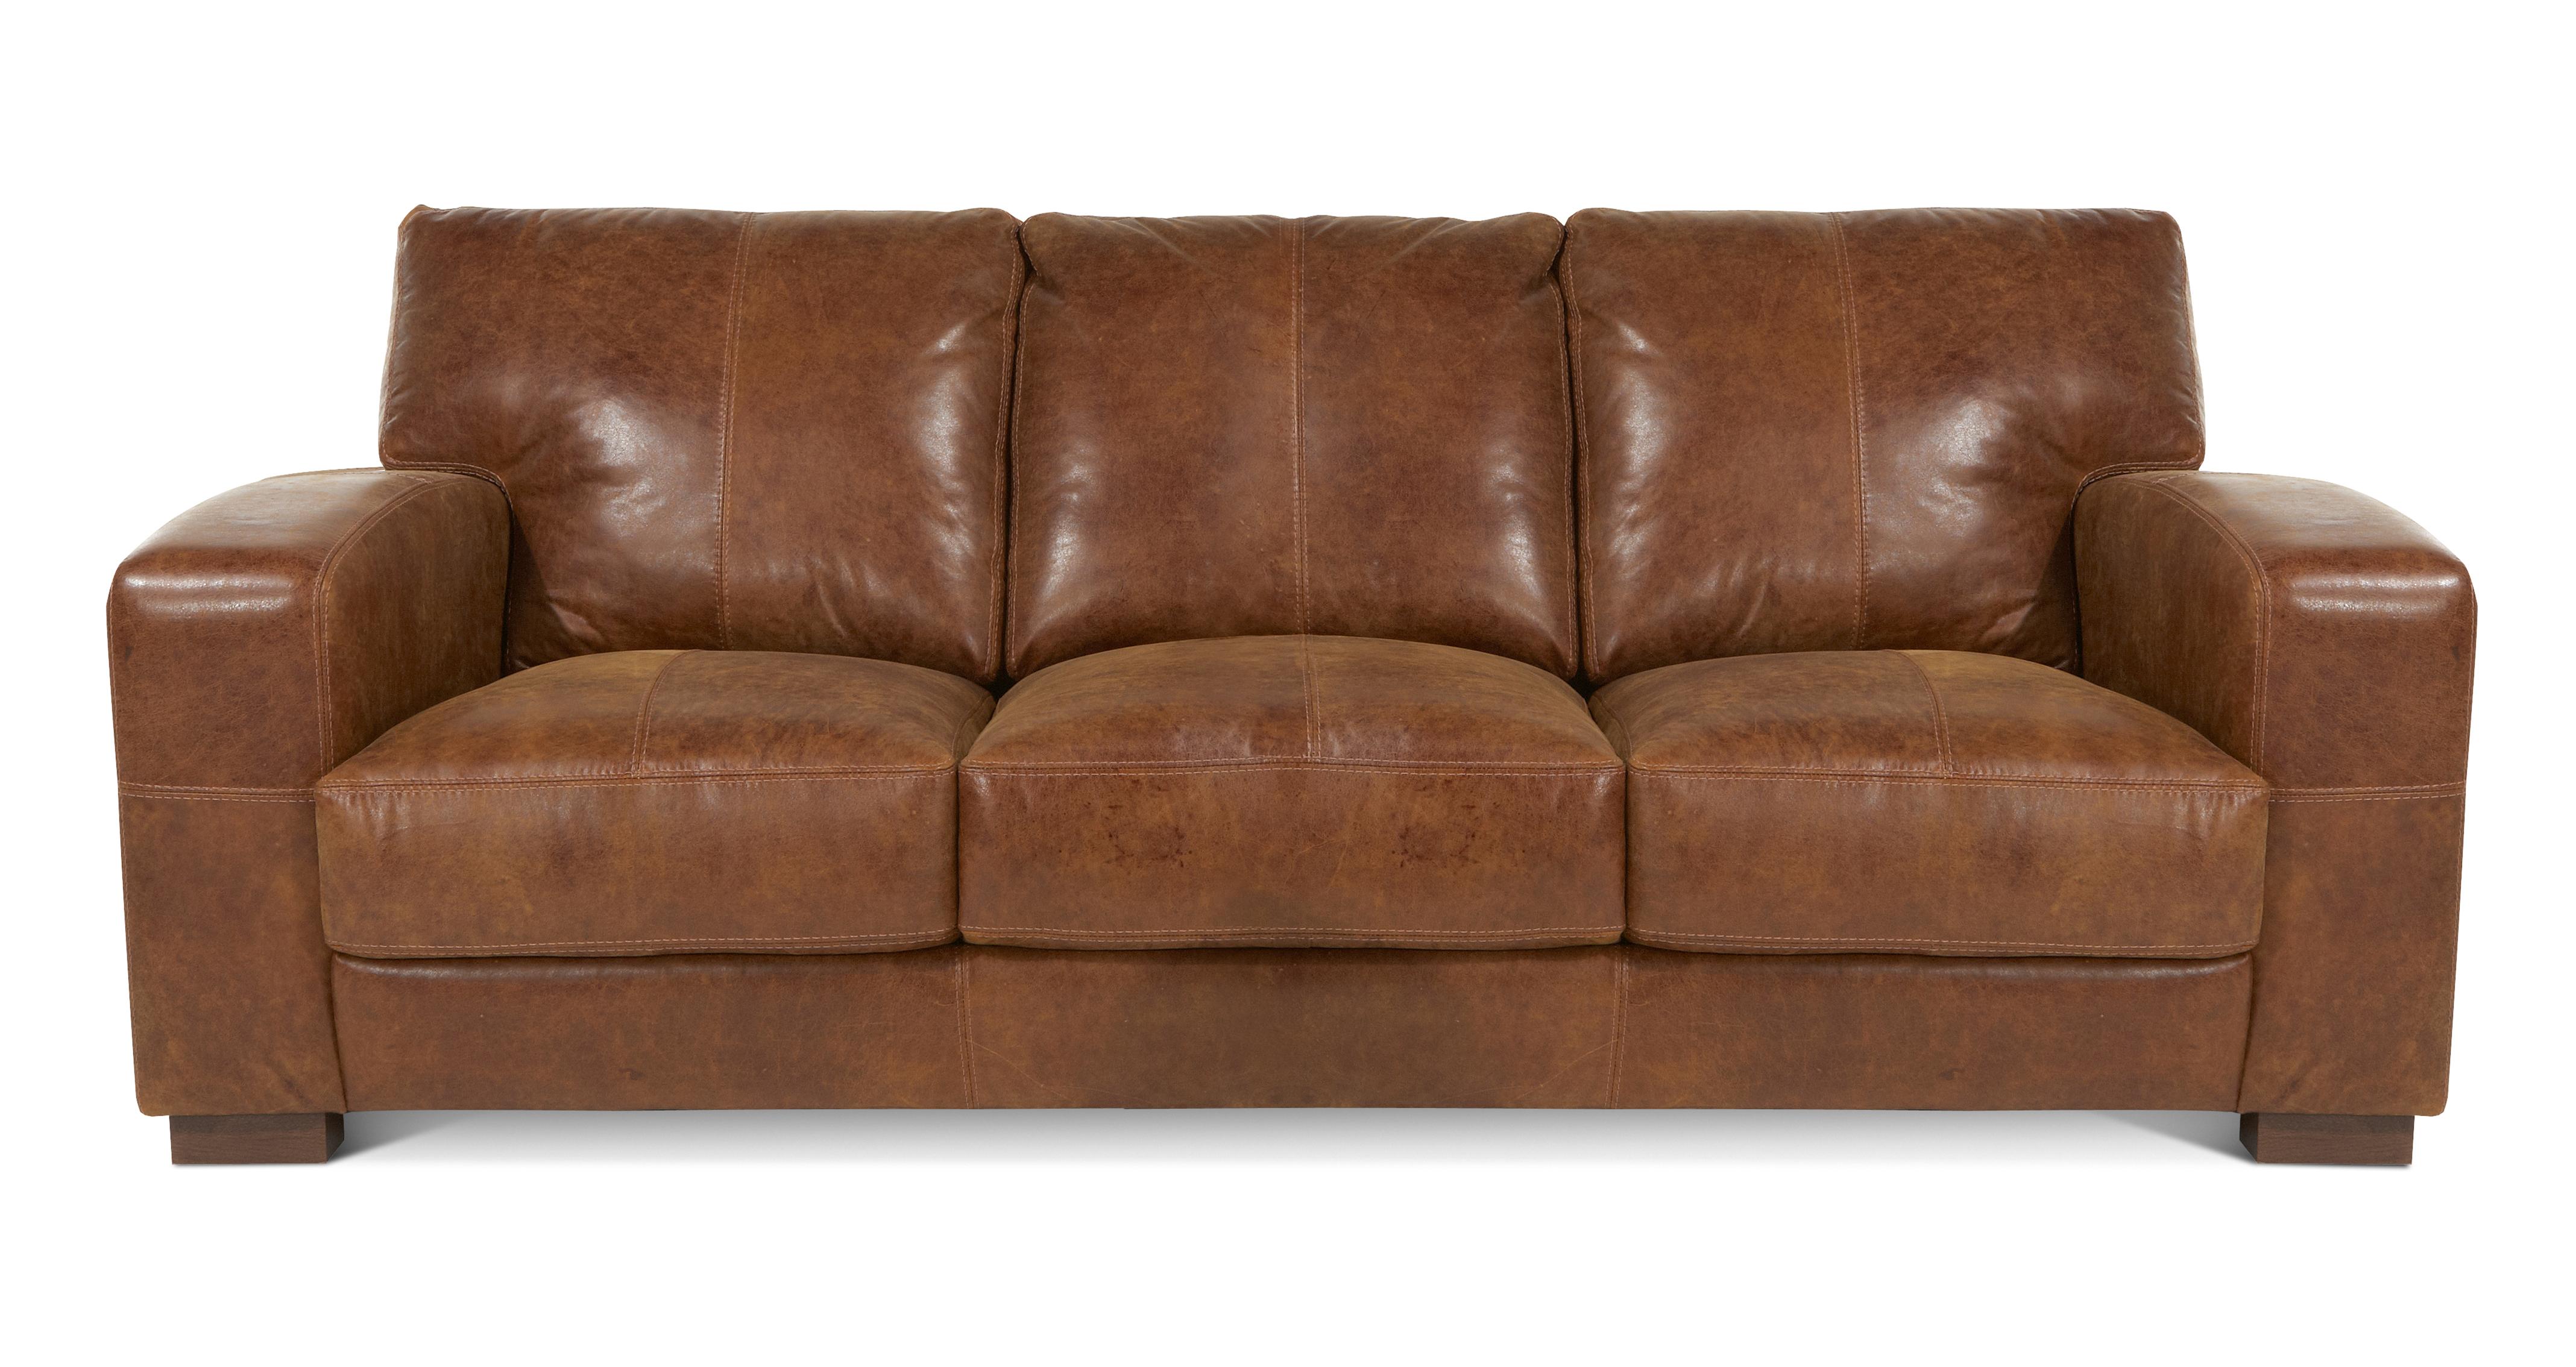 dfs leather sofa bed ebay